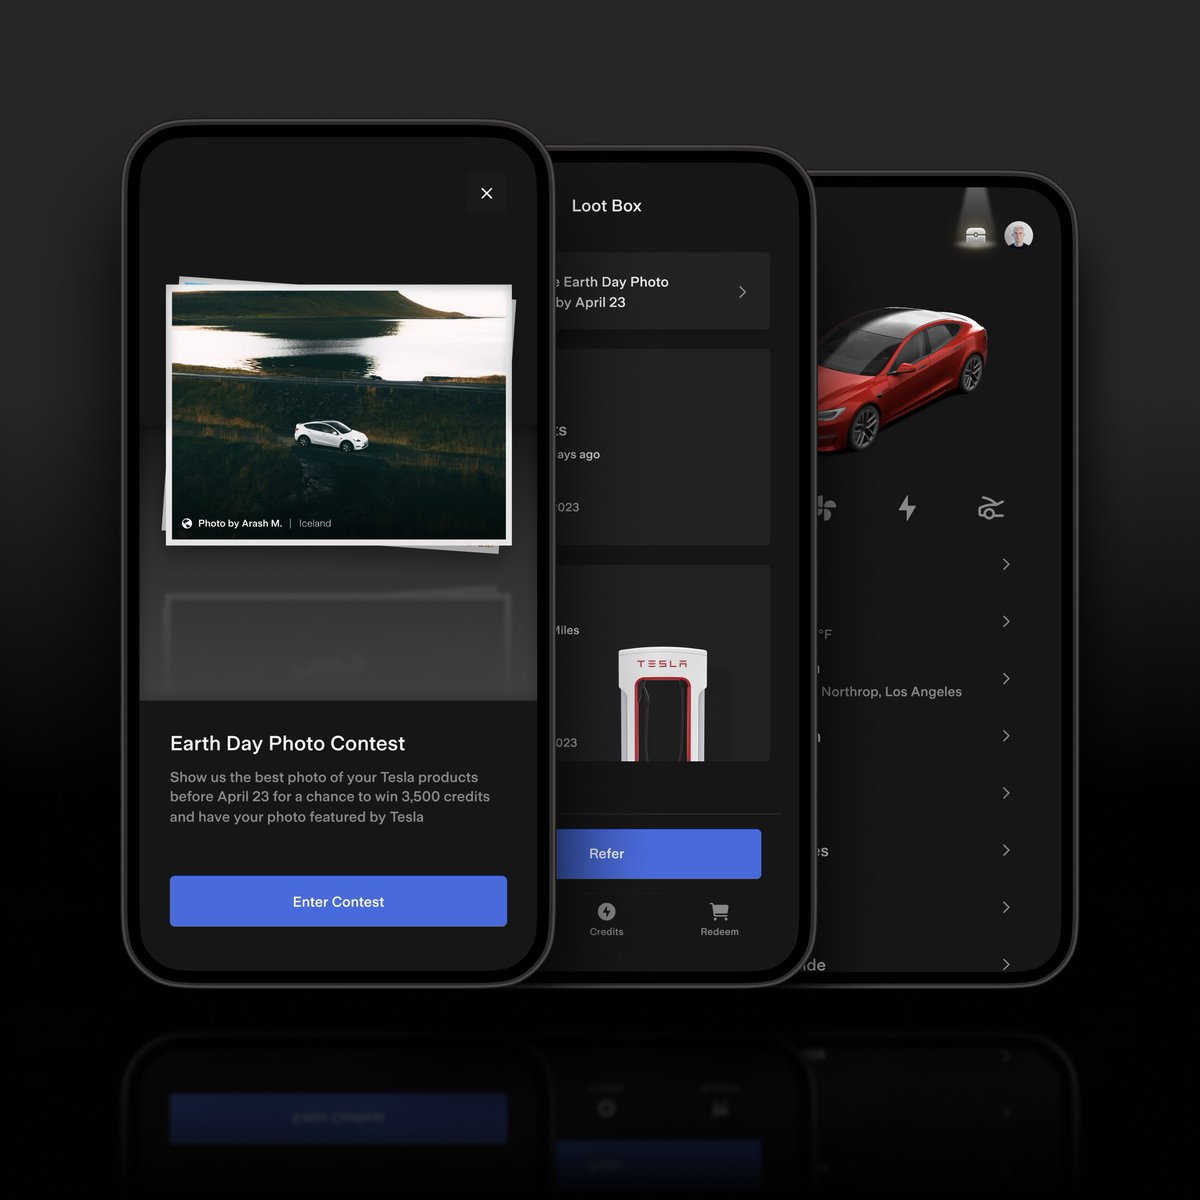 Earth Day photo contest now live in the Tesla app